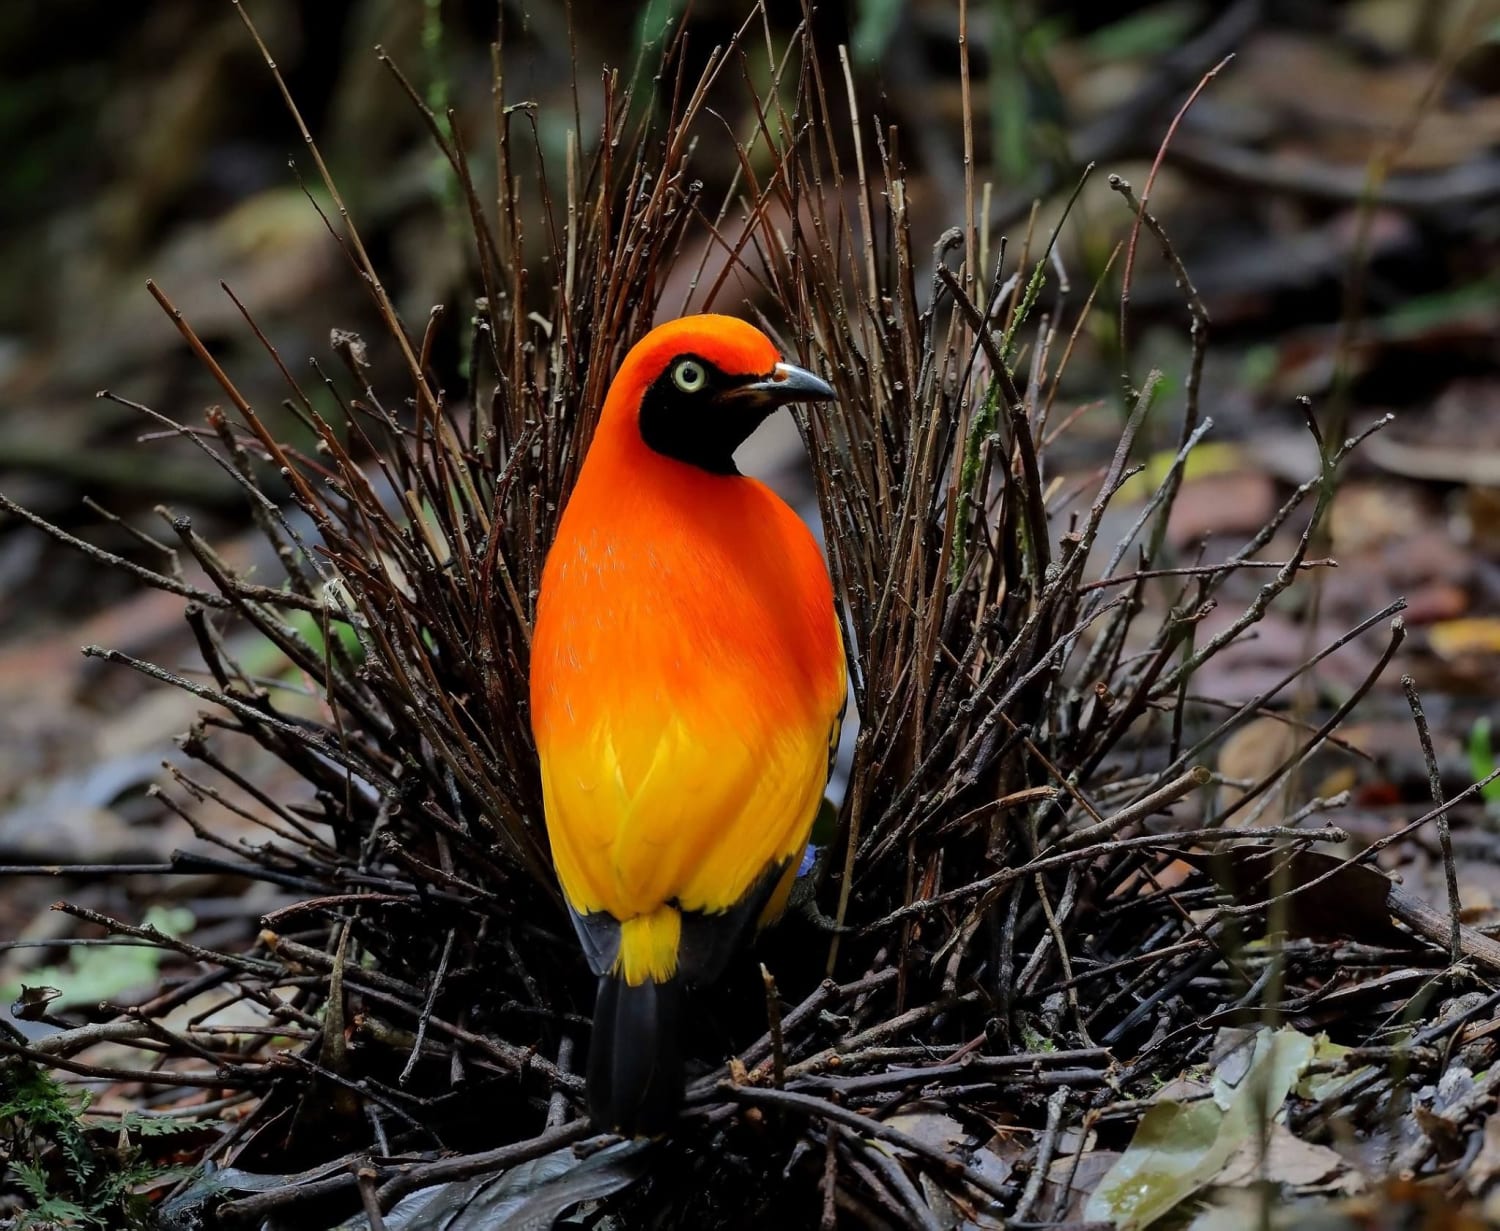 This masked bowerbird is a skilled architect